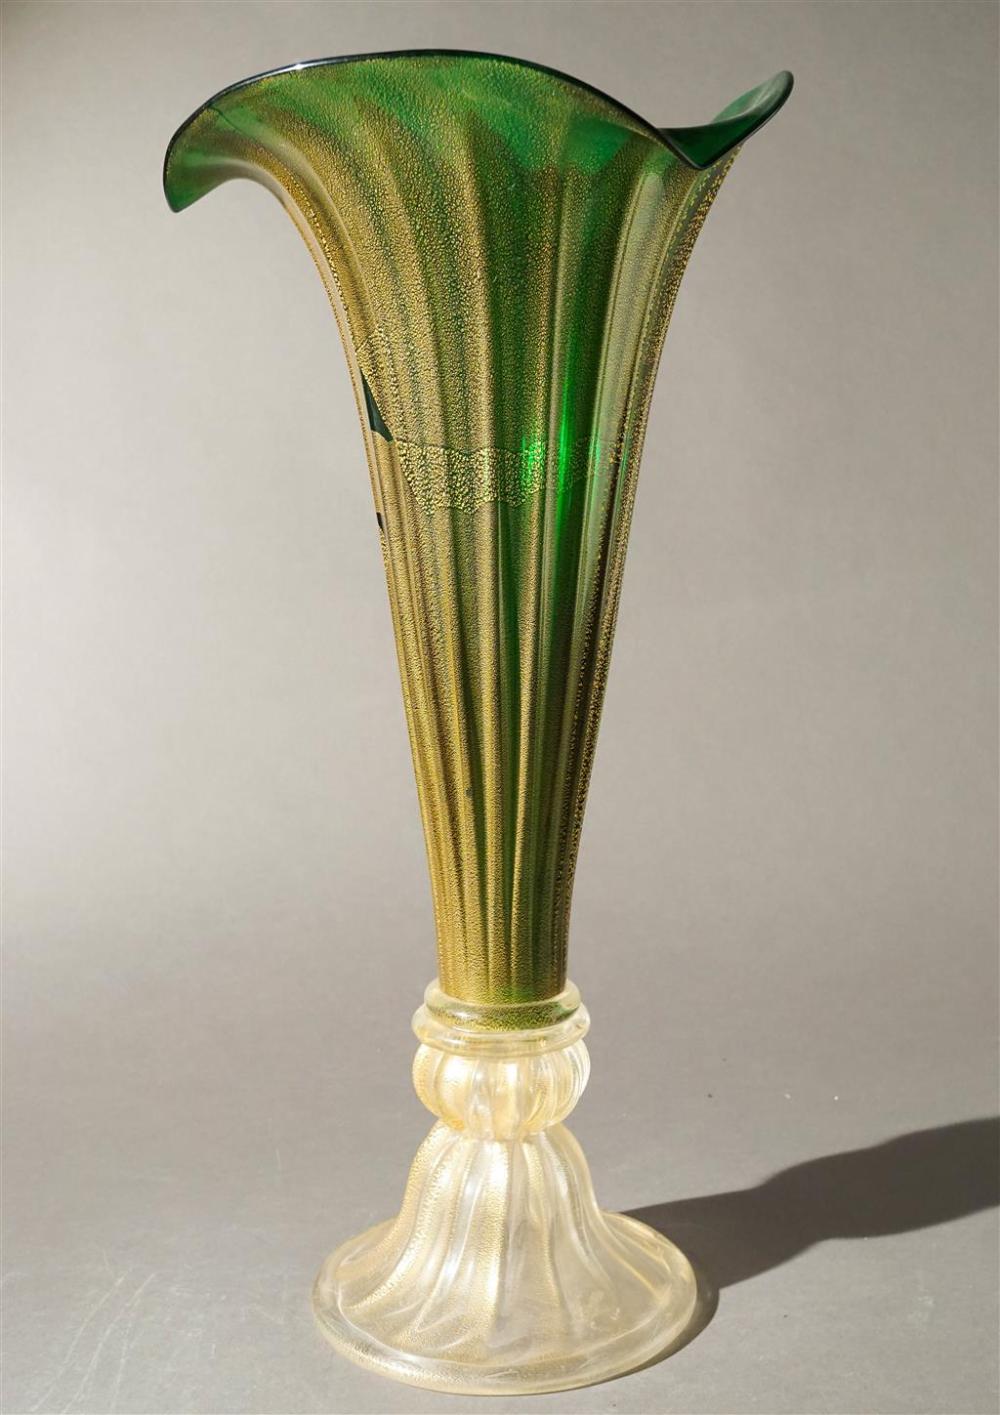 GOLD SPECKLED GREEN GLASS TRUMPET